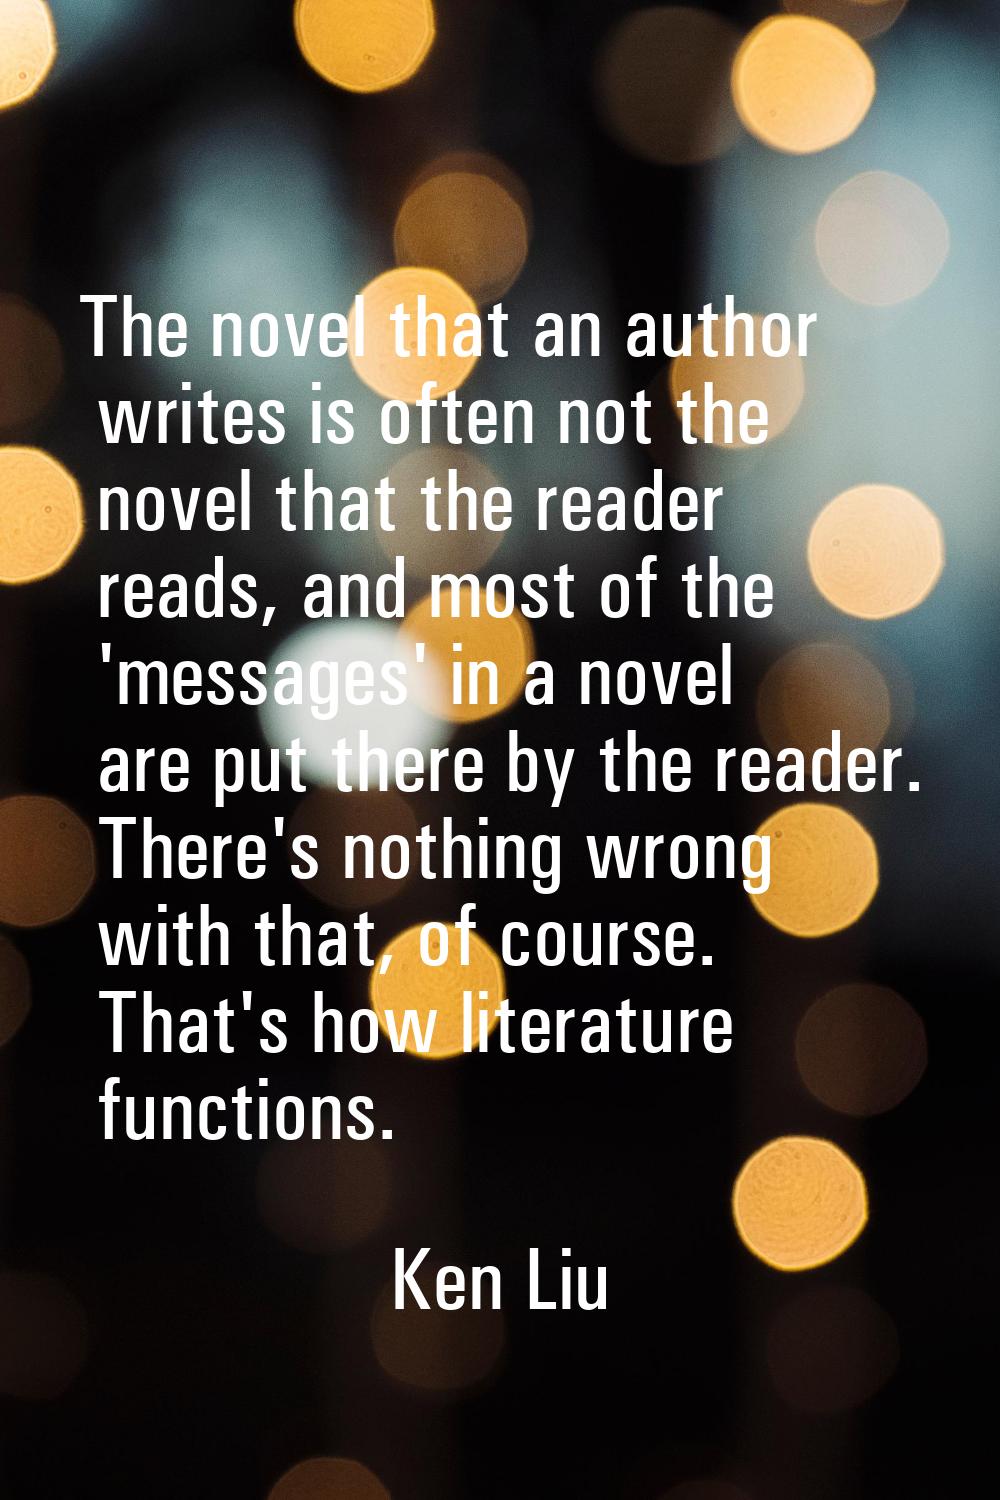 The novel that an author writes is often not the novel that the reader reads, and most of the 'mess